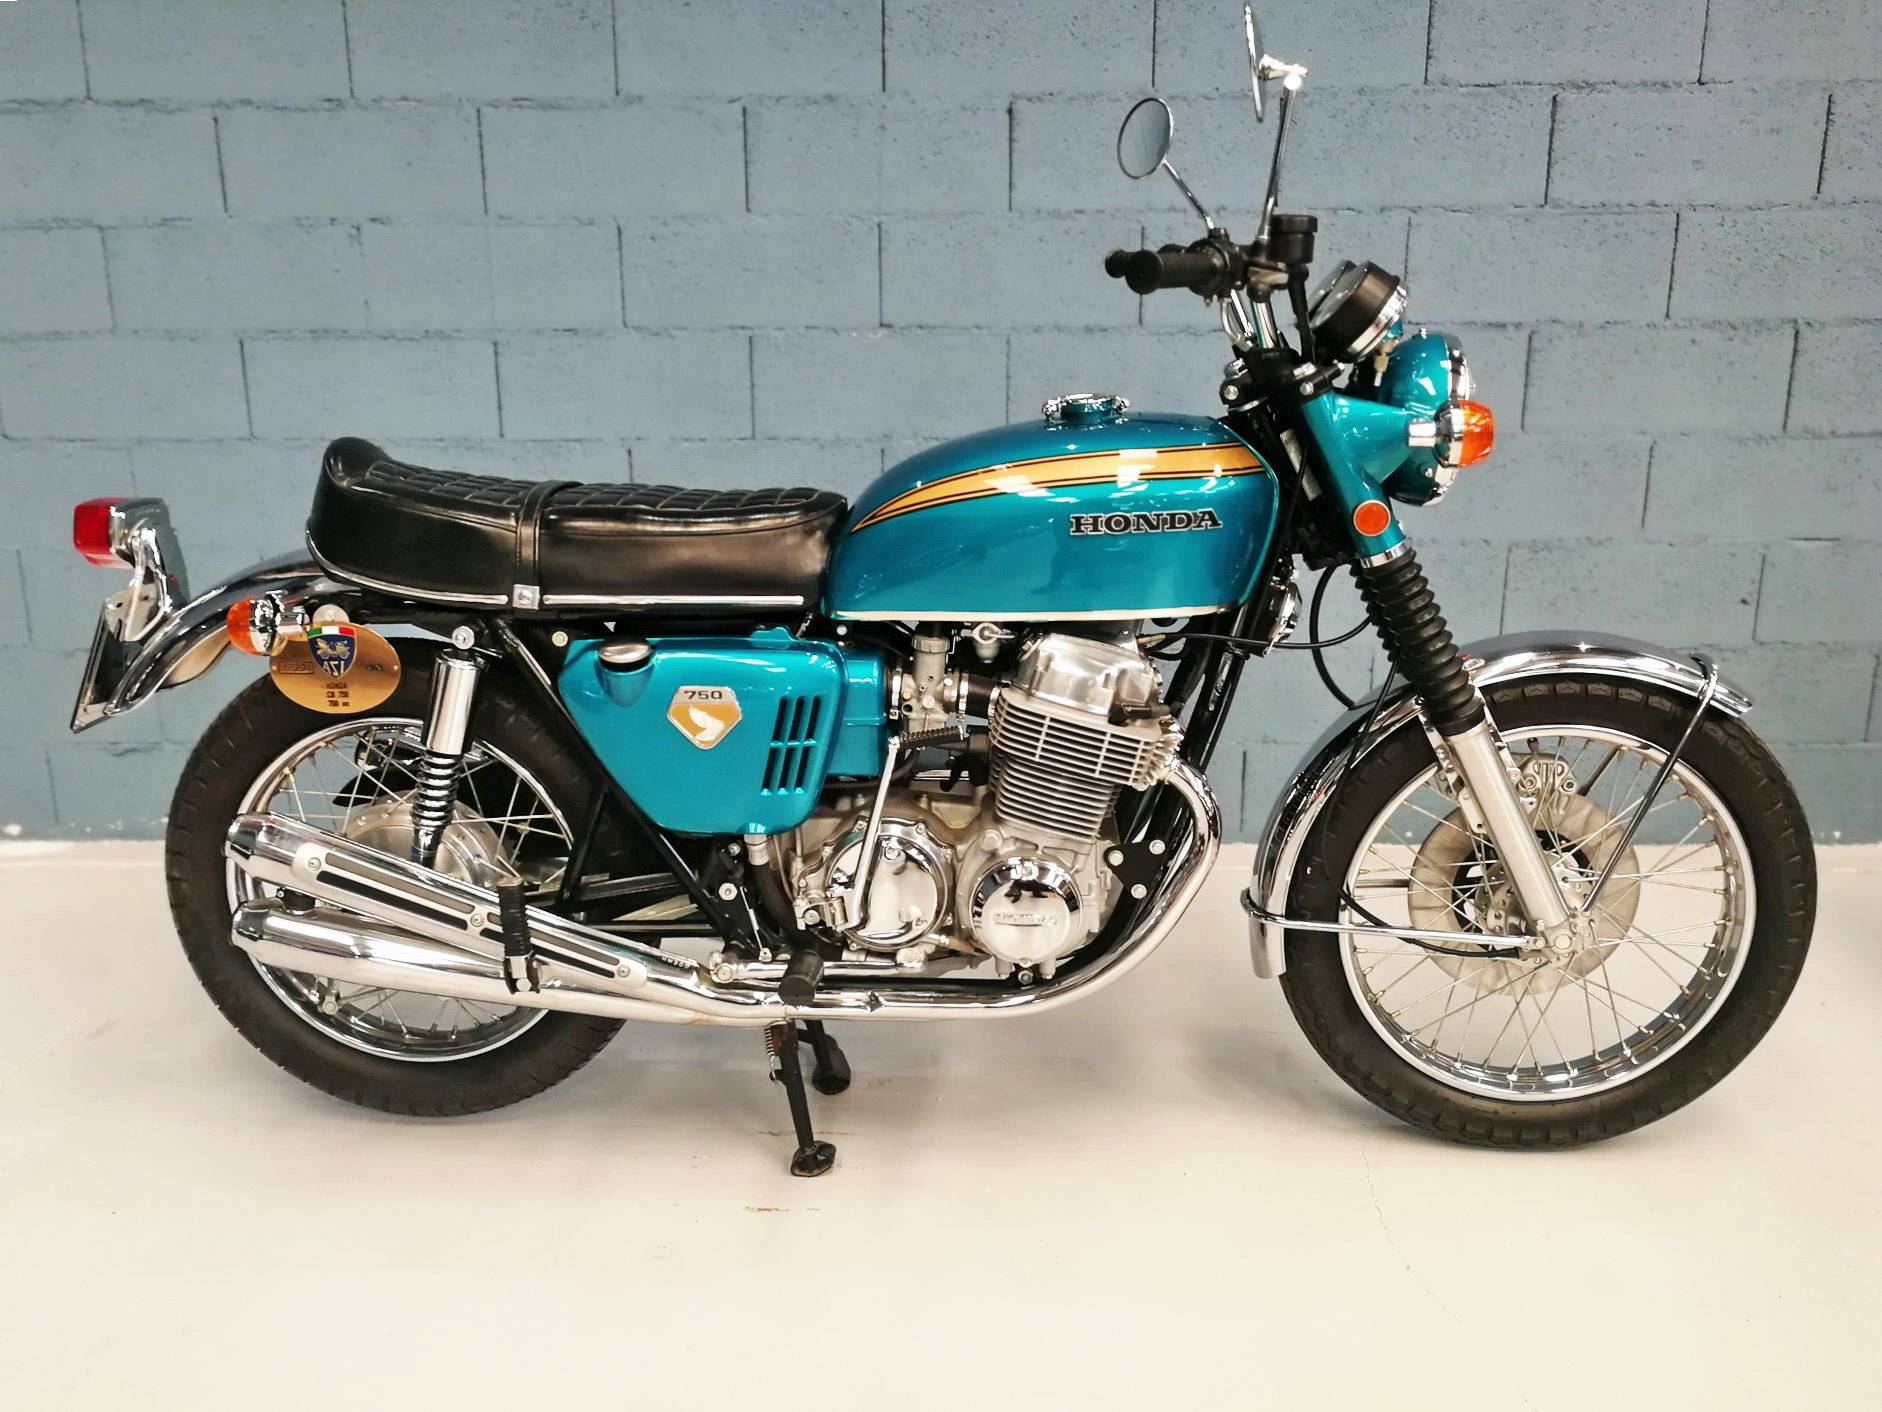 For Sale Honda CB 750 Four (1969) offered for AUD 66,482